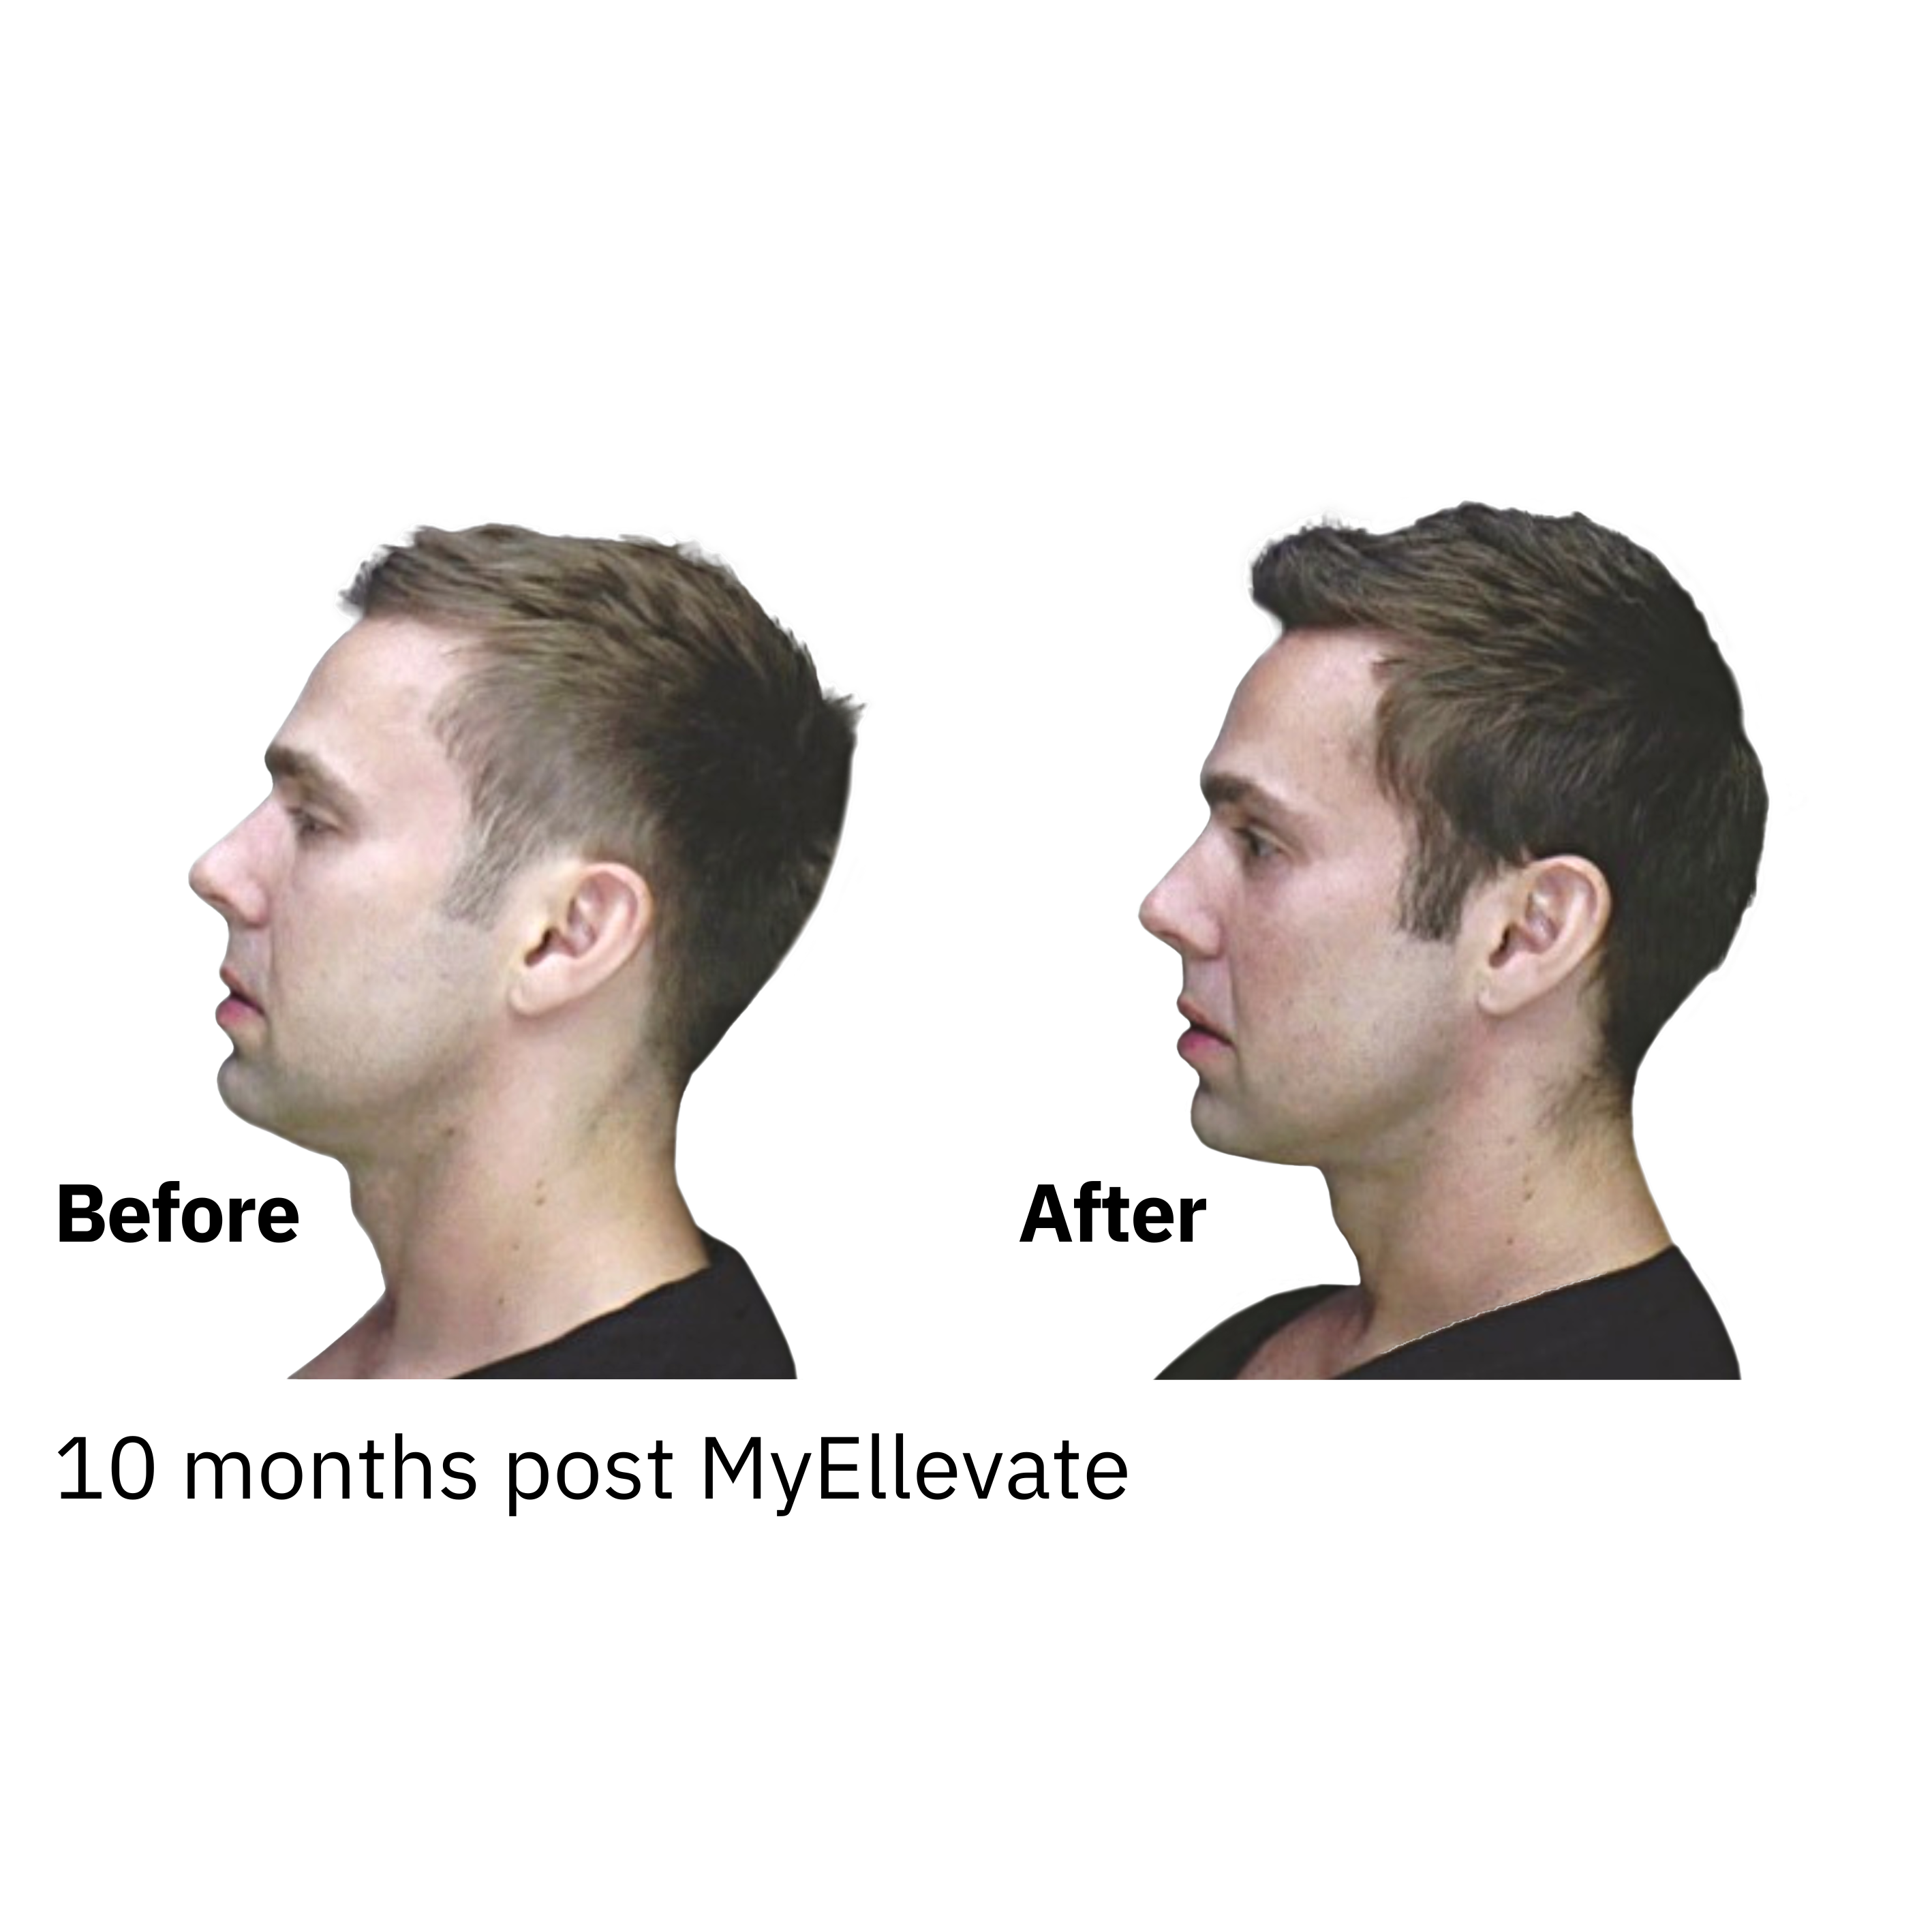 Neck Lift | Before and after images of the MyEllevate operation results.